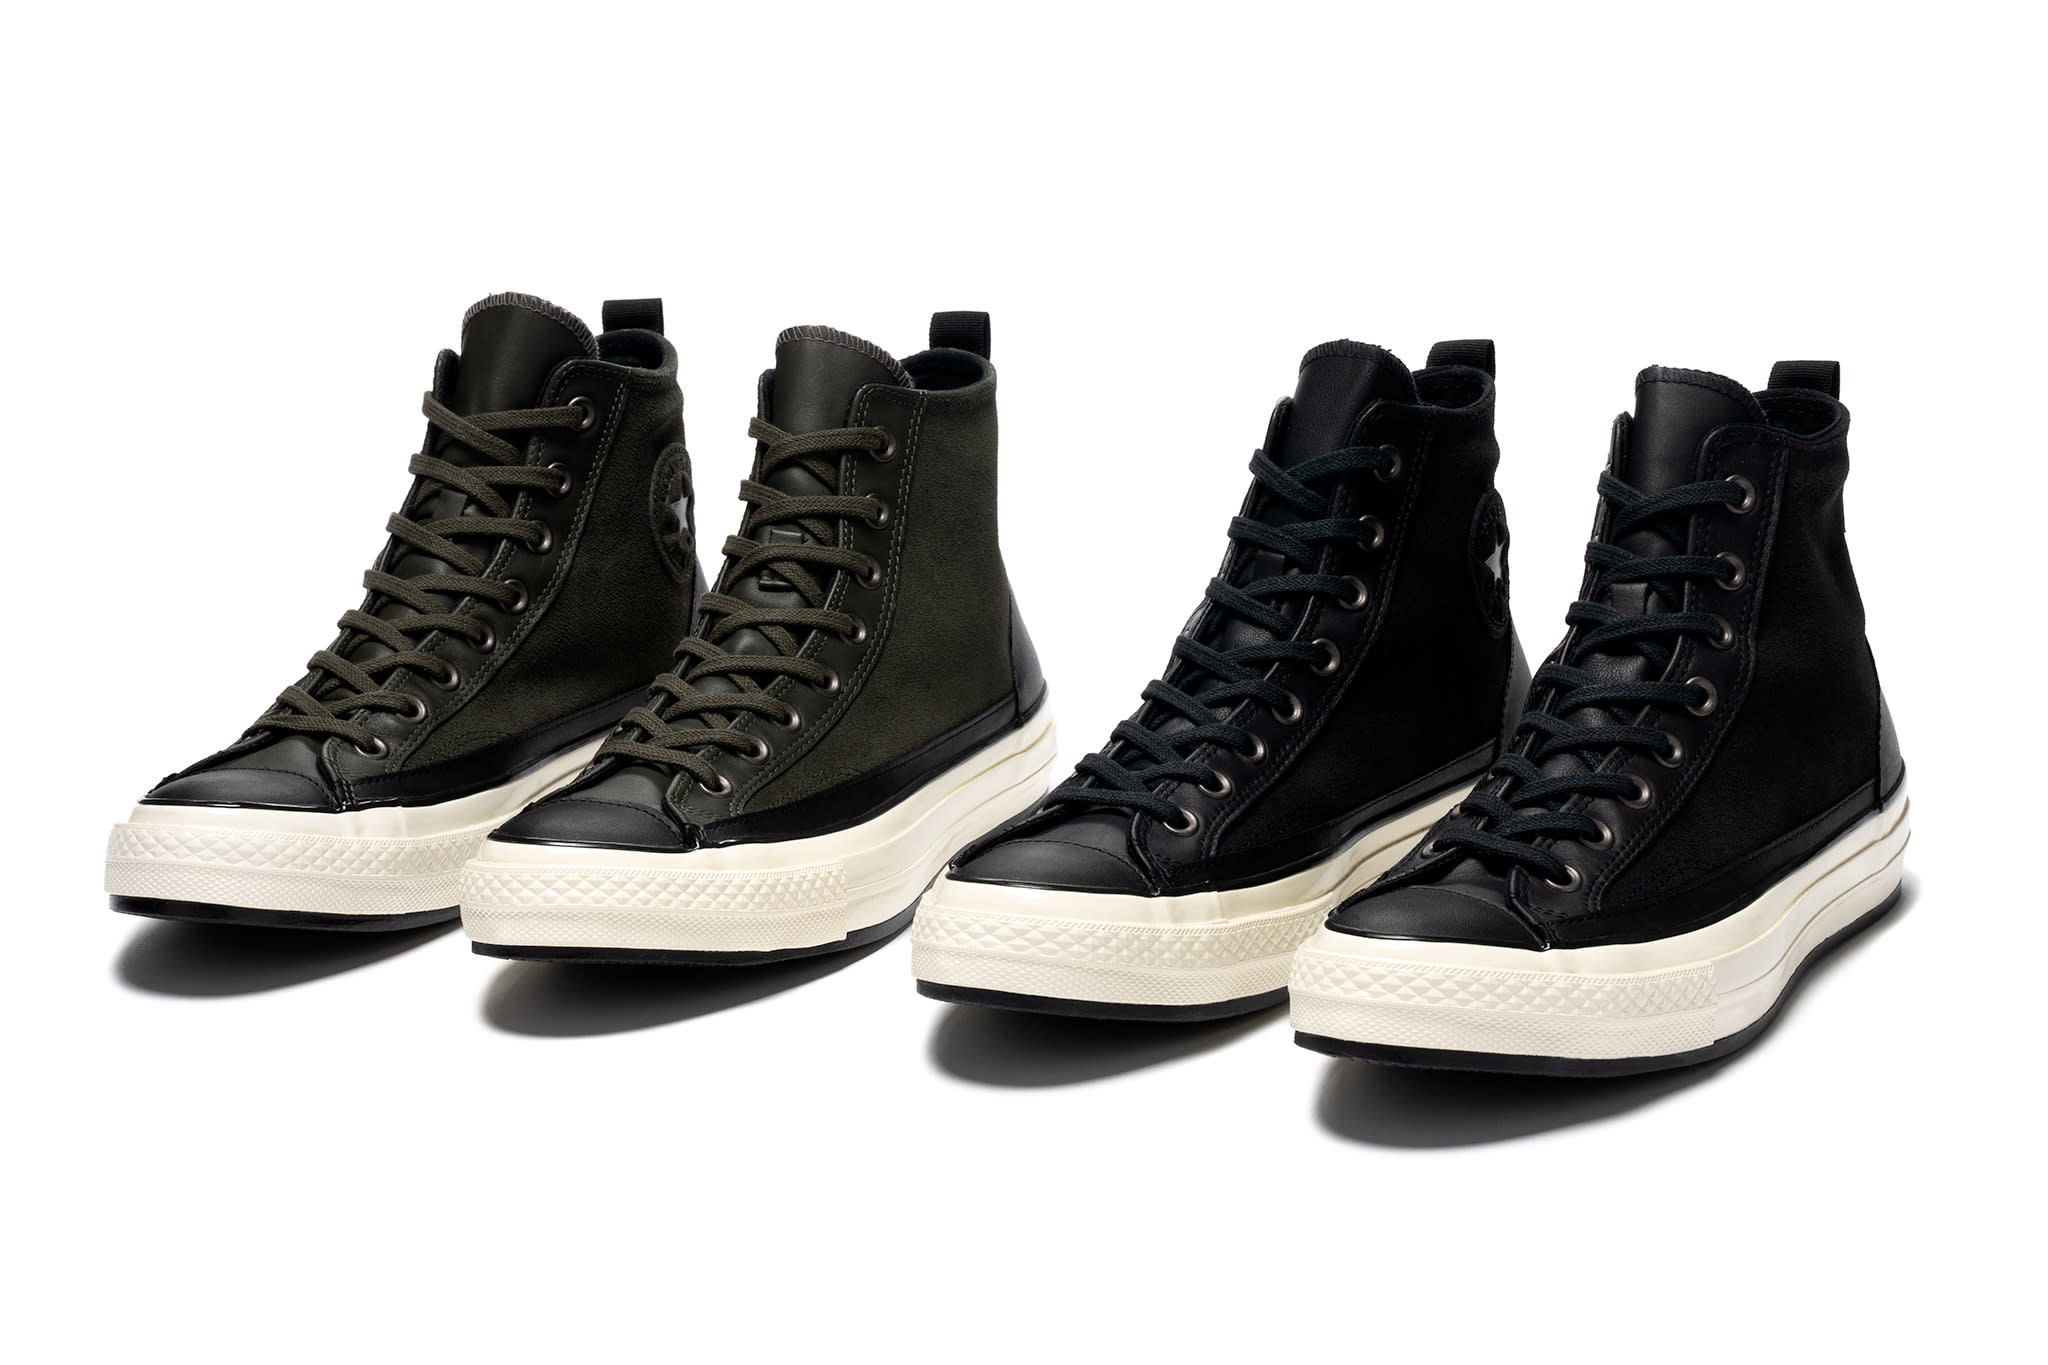 HAVEN / Converse GORE-TEX® Chuck 70 Hi Black & Forest Night | Now  Available | HAVEN